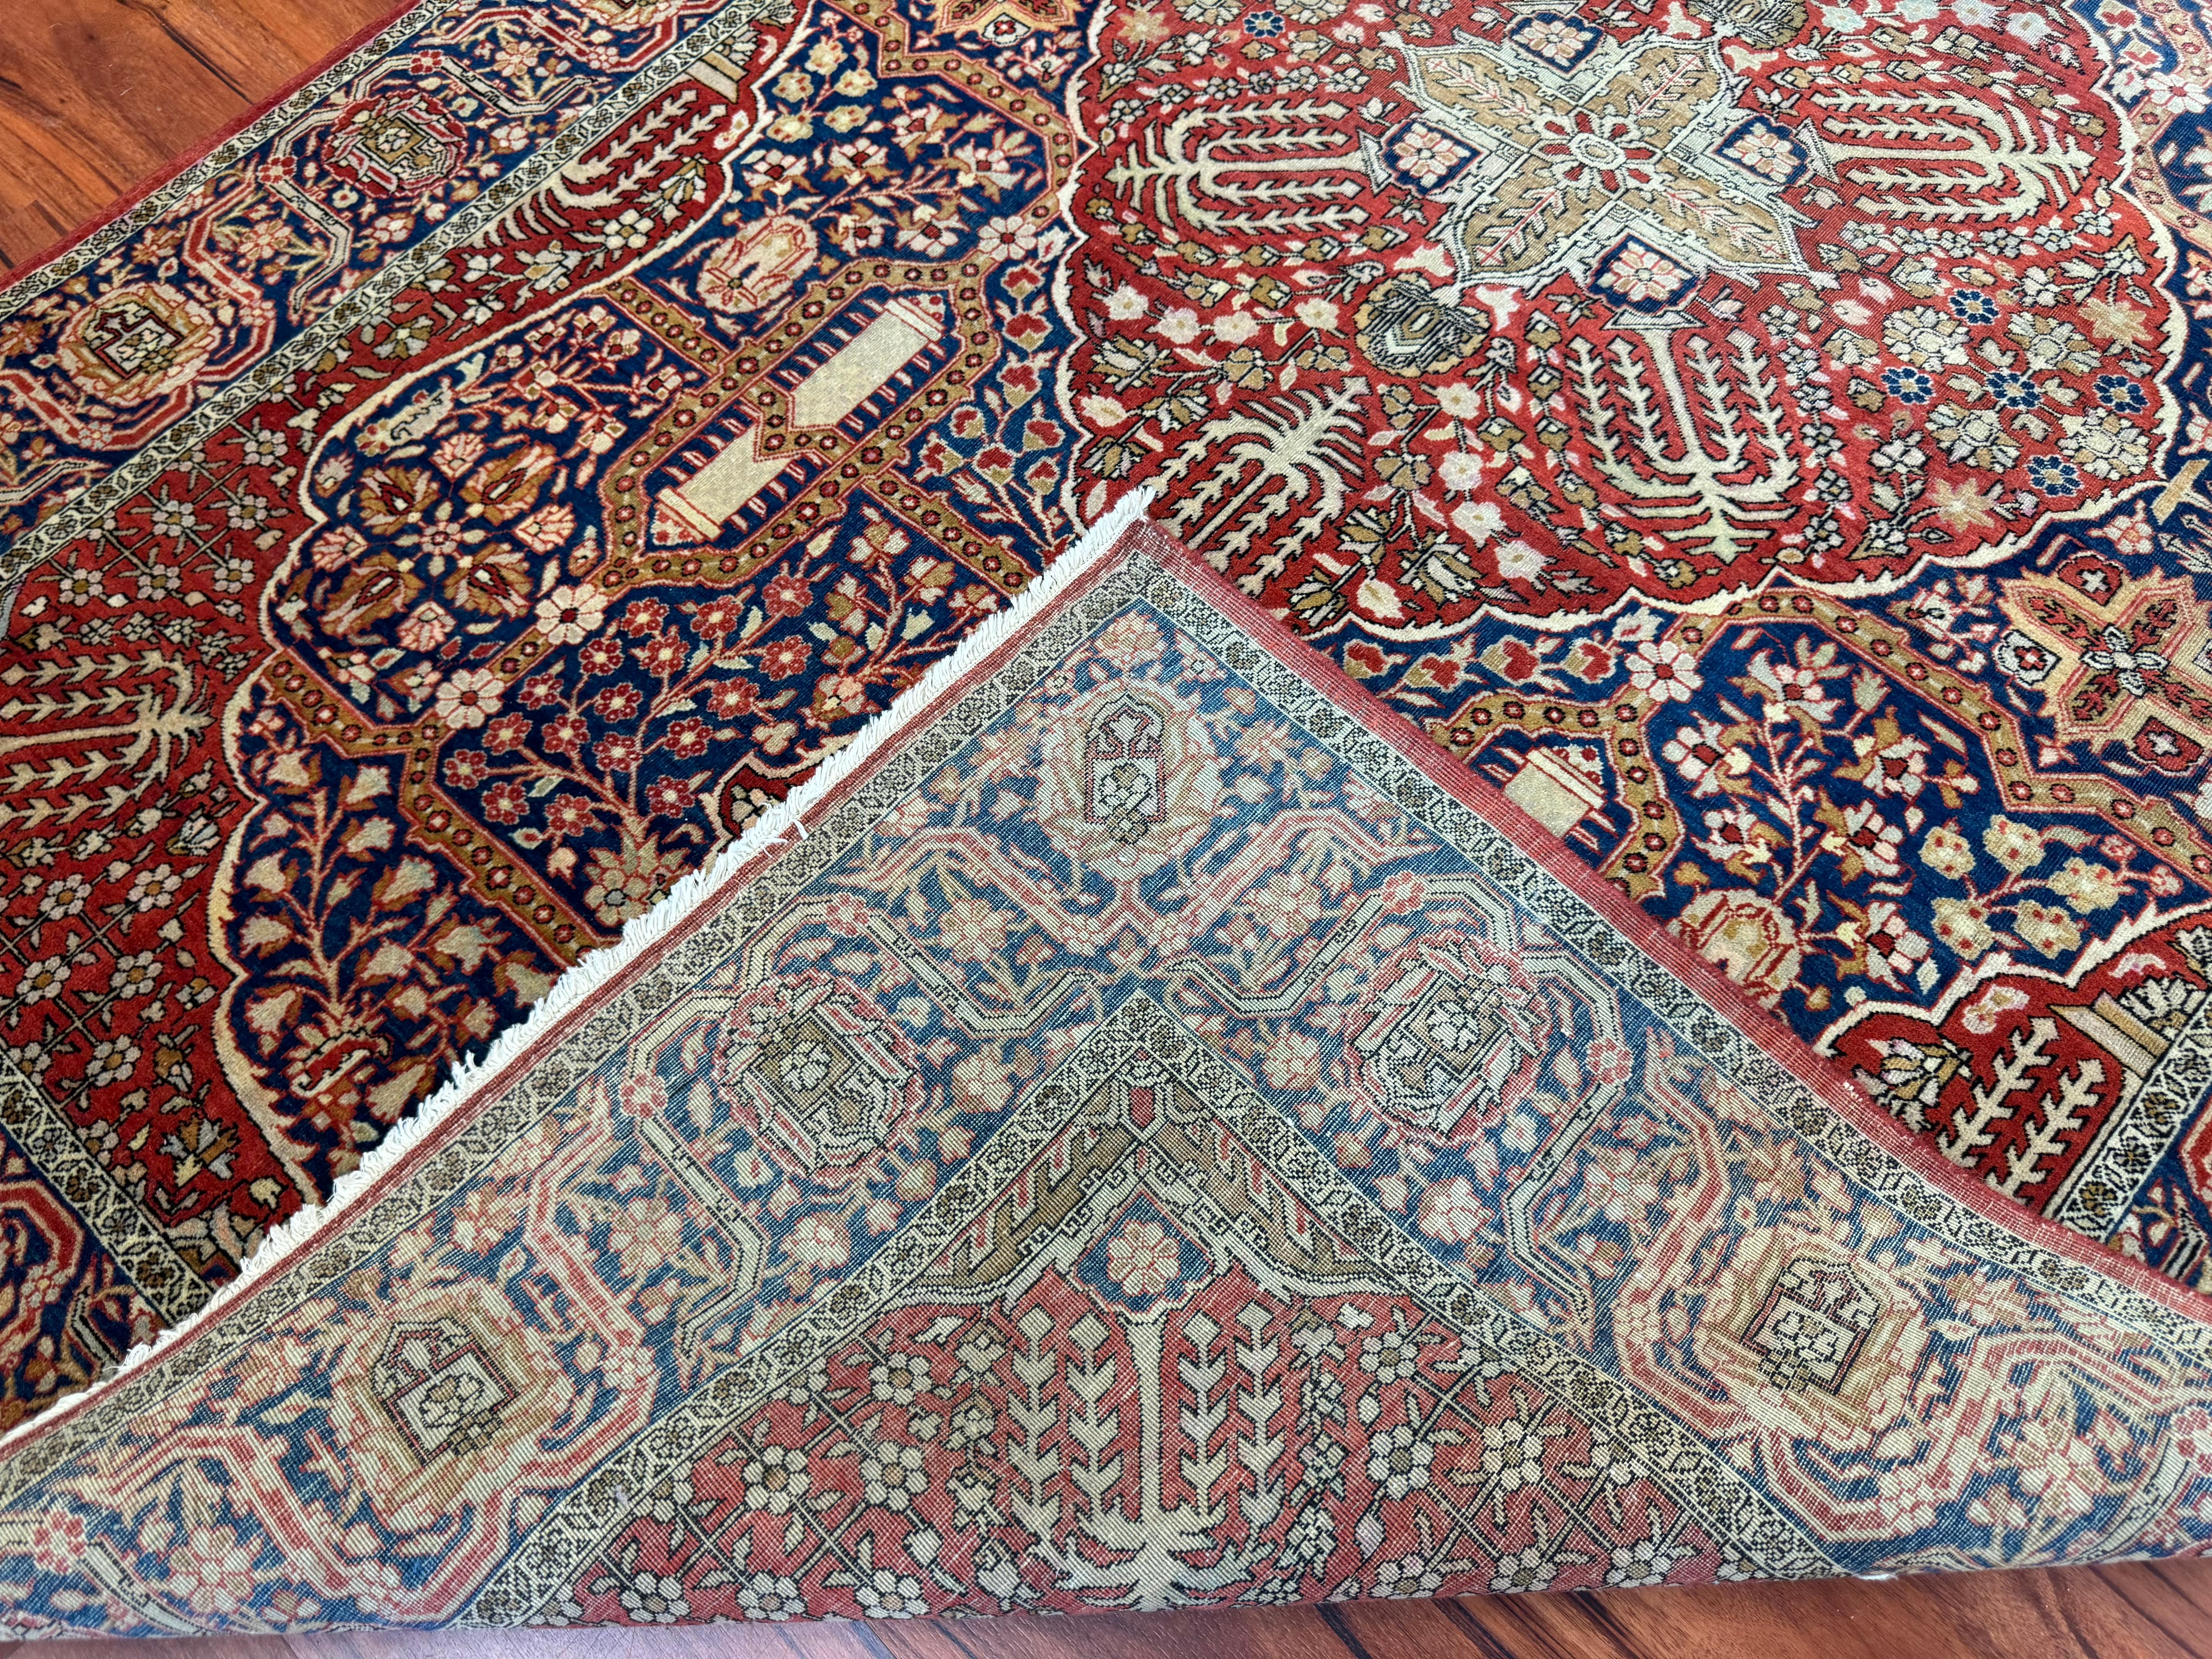 A very rare Extremely Fine Antique Persian Kashan Rug that originates from Iran in the early 1900s. This rug has an unusual design that isn’t seen very often and makes this rug very unique! The beautiful color combinations match the rugs design and